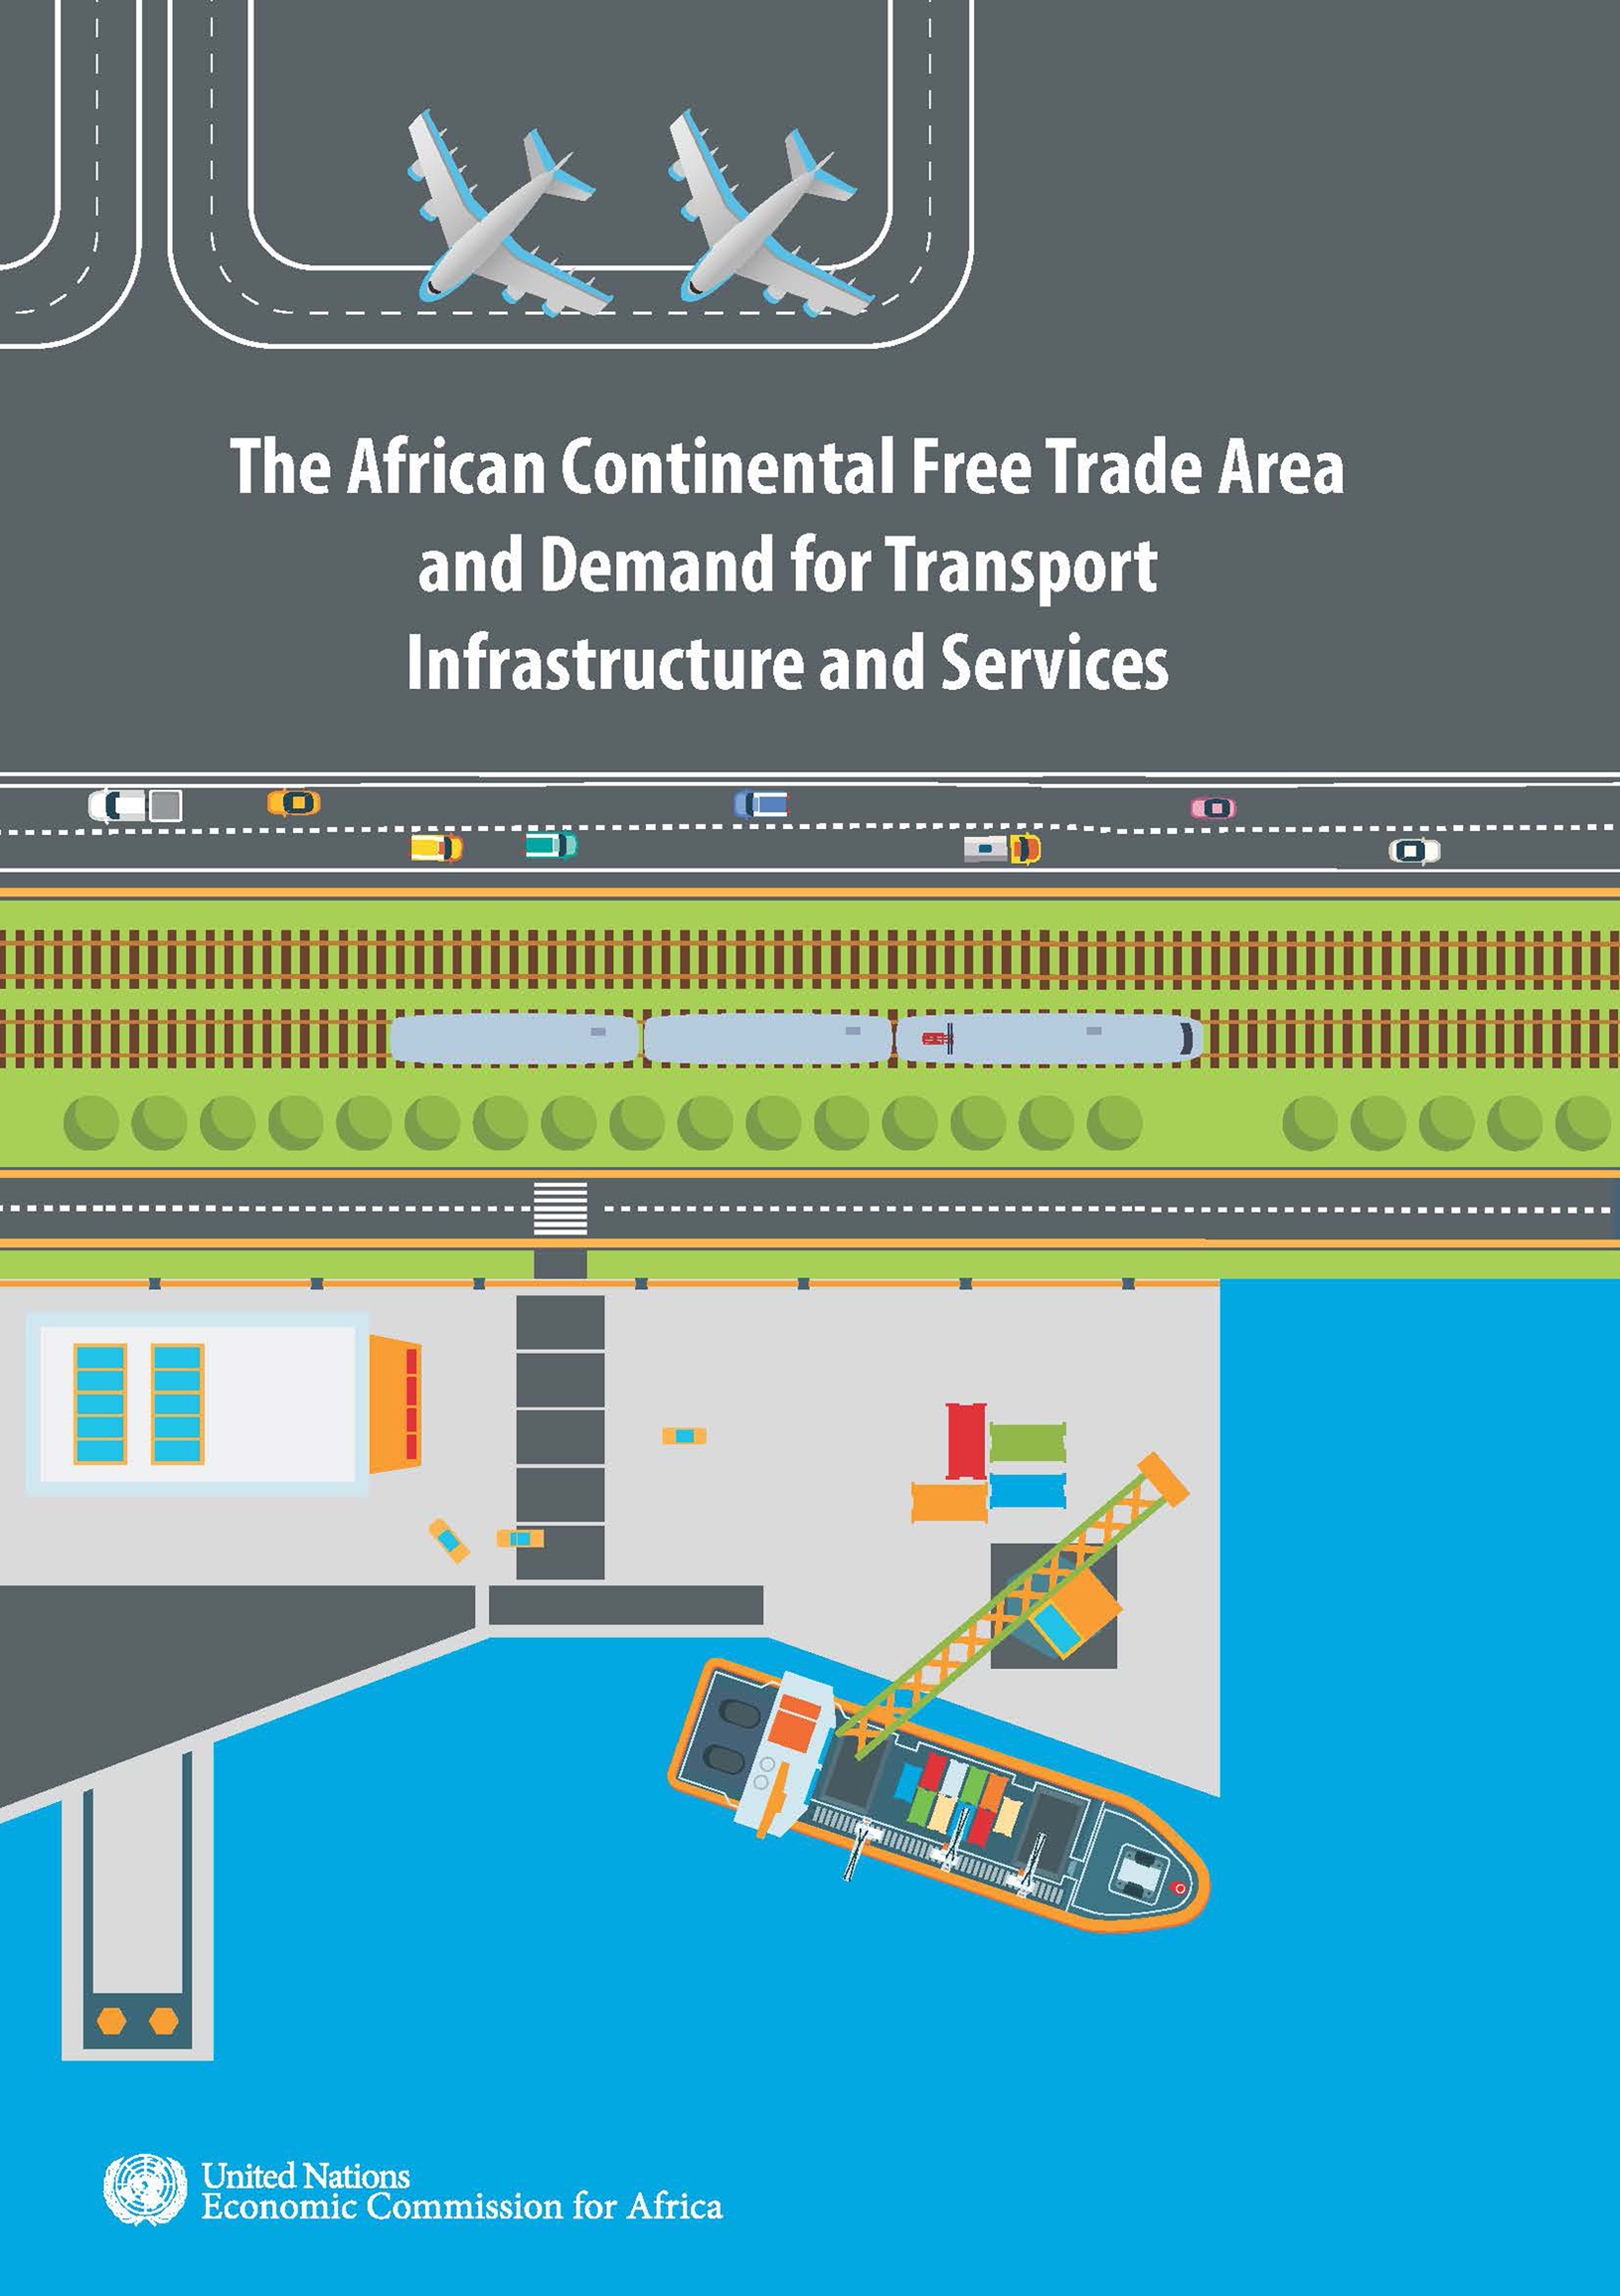 image of The African Continental Free Trade Area and Demand for Transport Infrastructure and Services